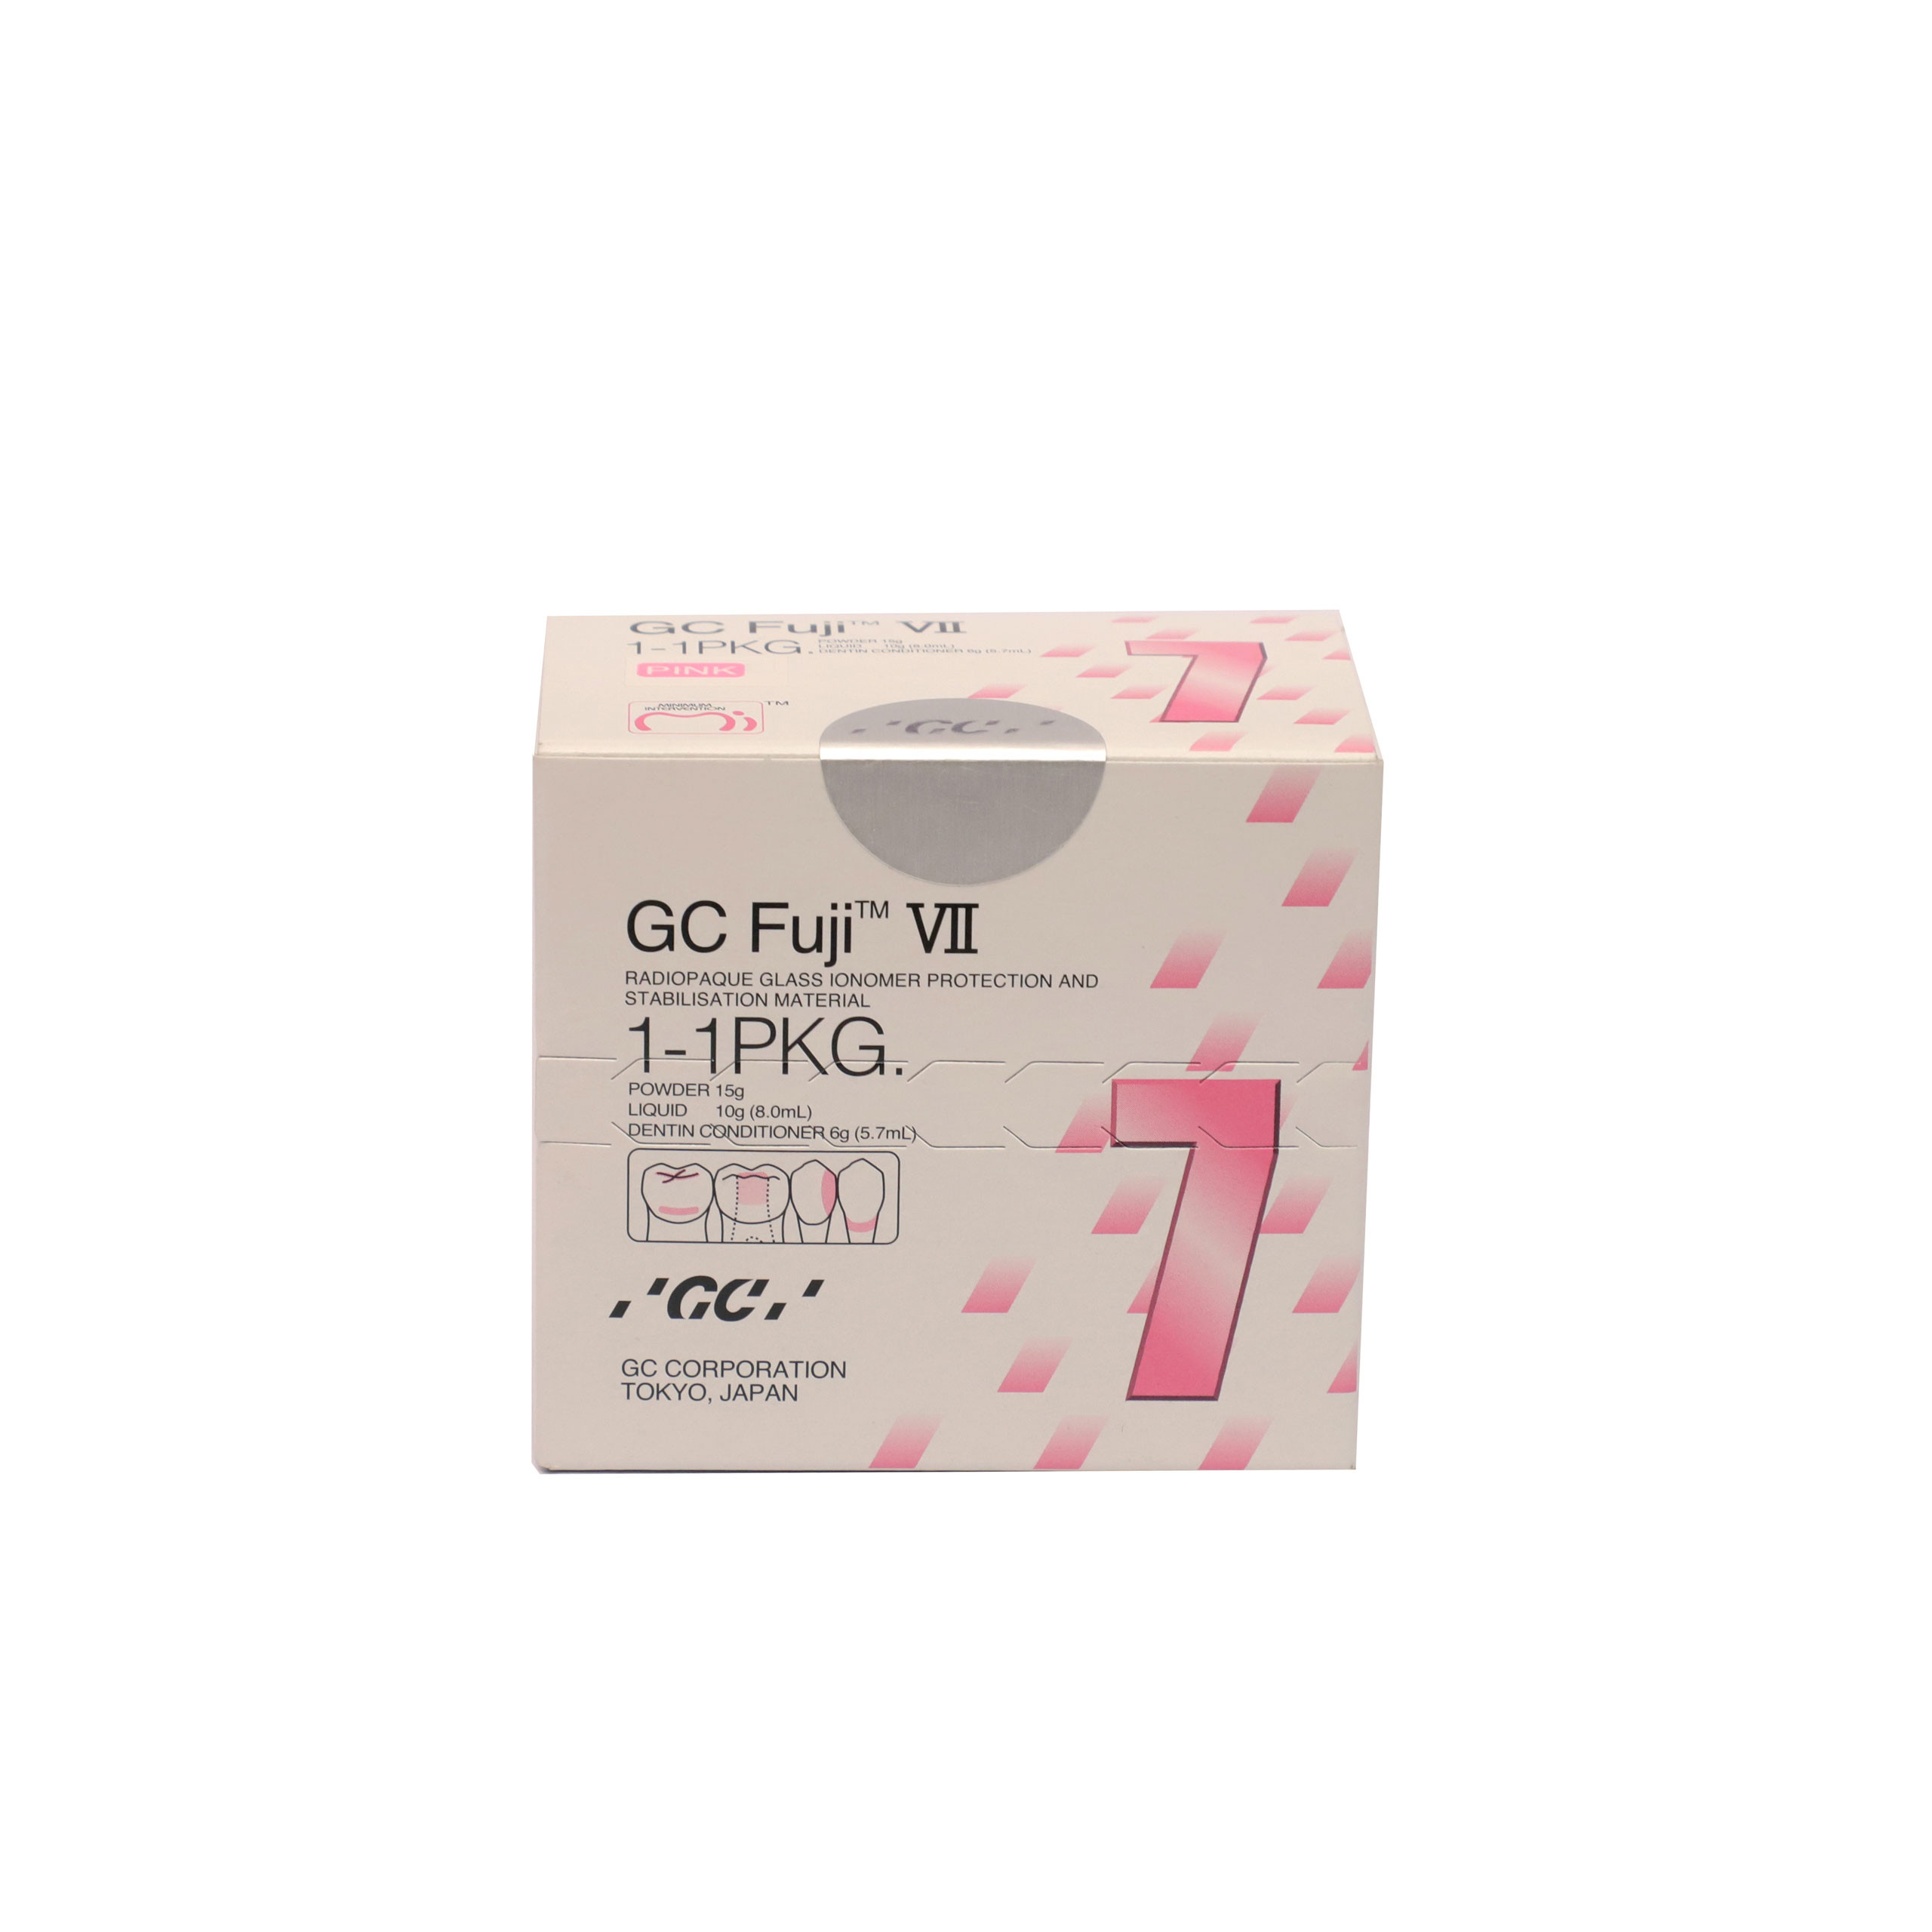 GC Fuji VII 1-1PKG (Rdiopaque Glass Ionomer Protection and Stabilisation Material )